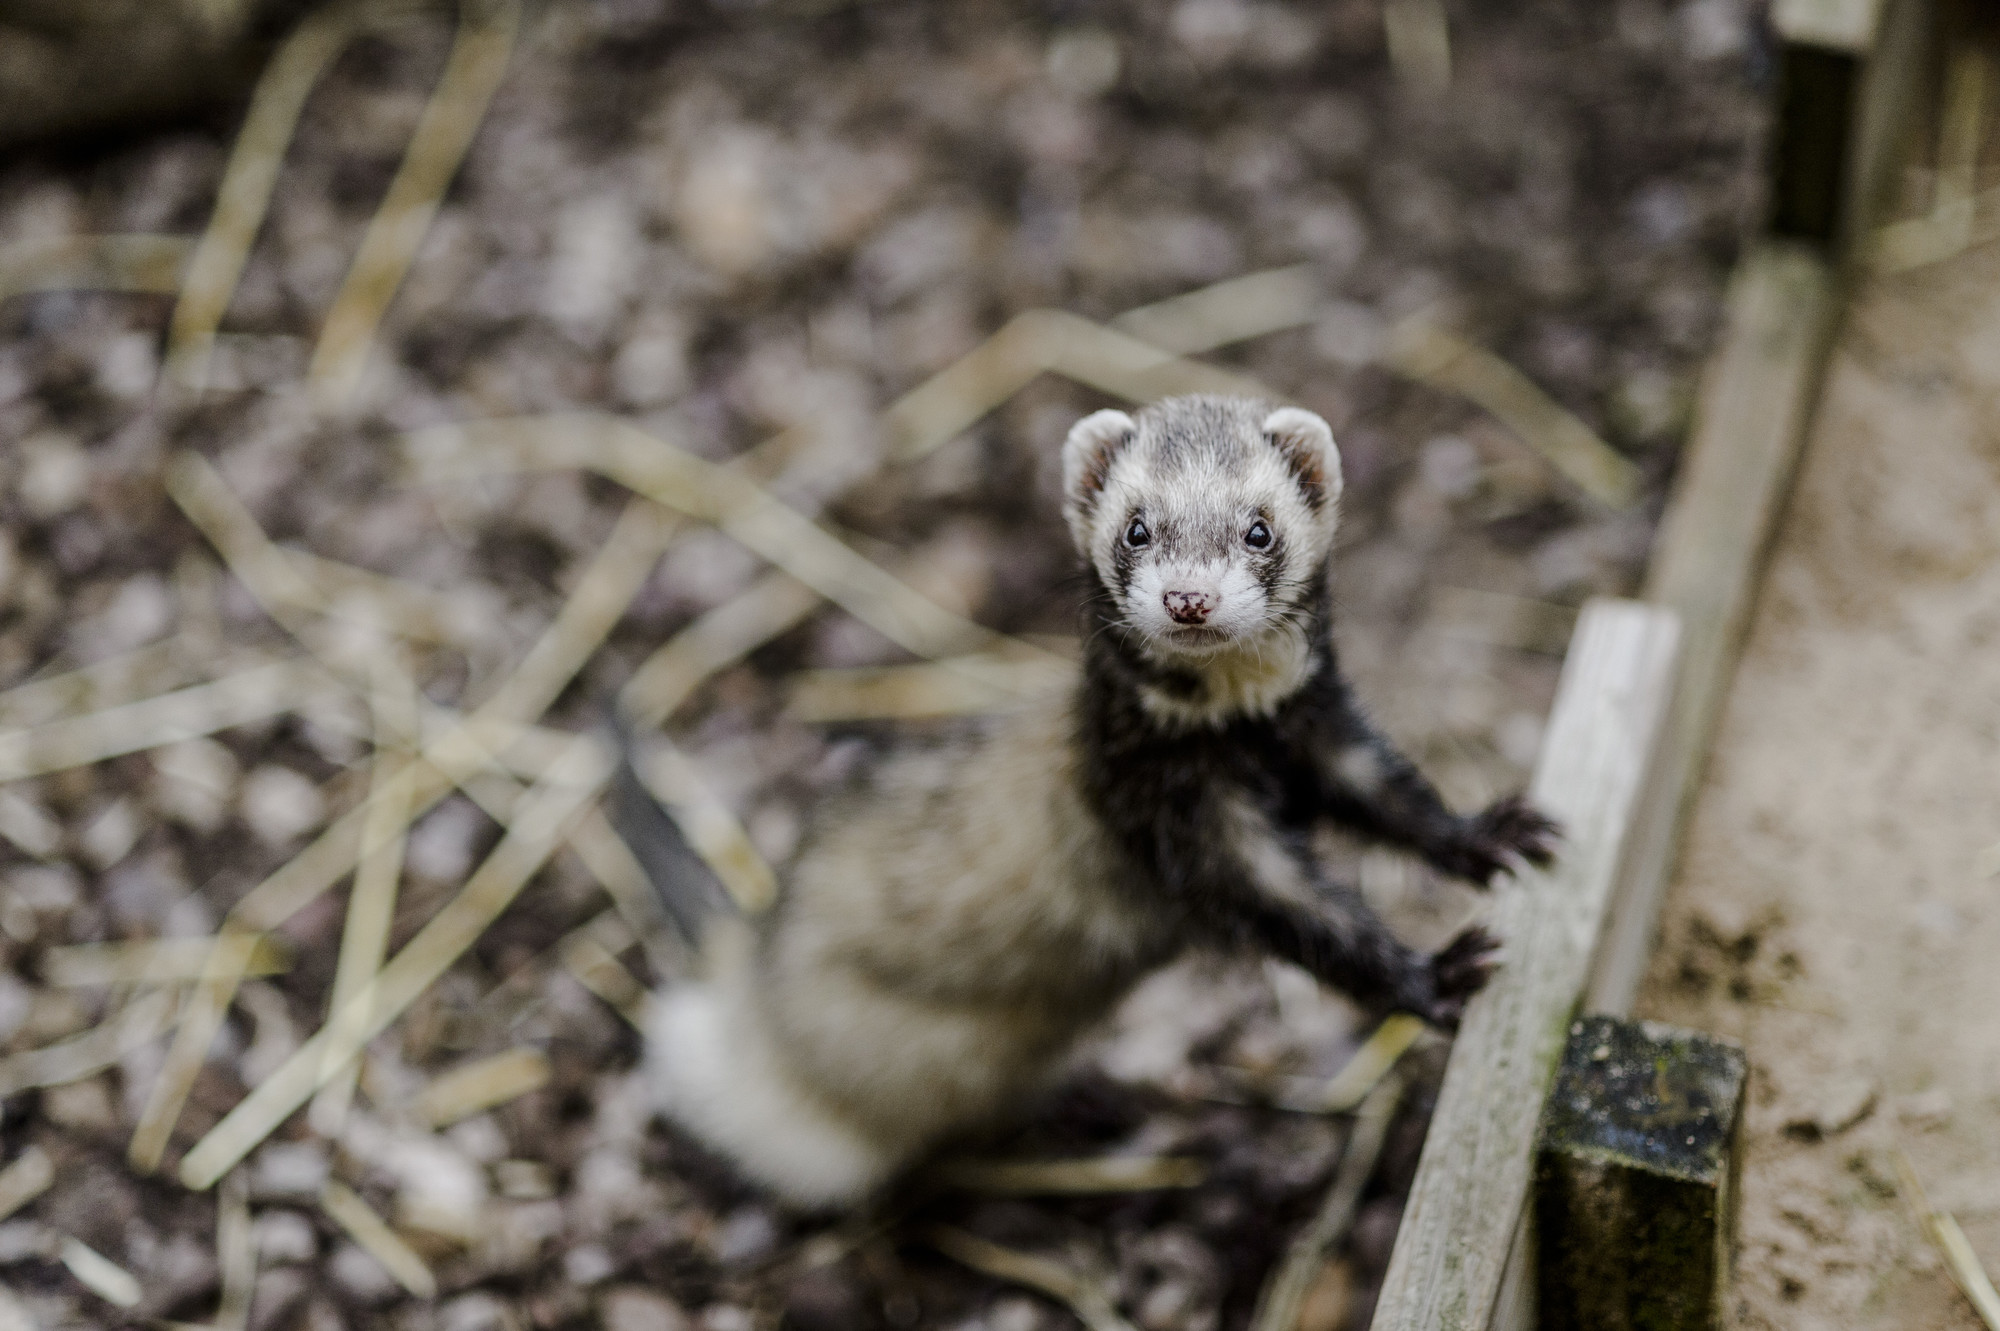 A chocolate ferret peering out of their accommodation.